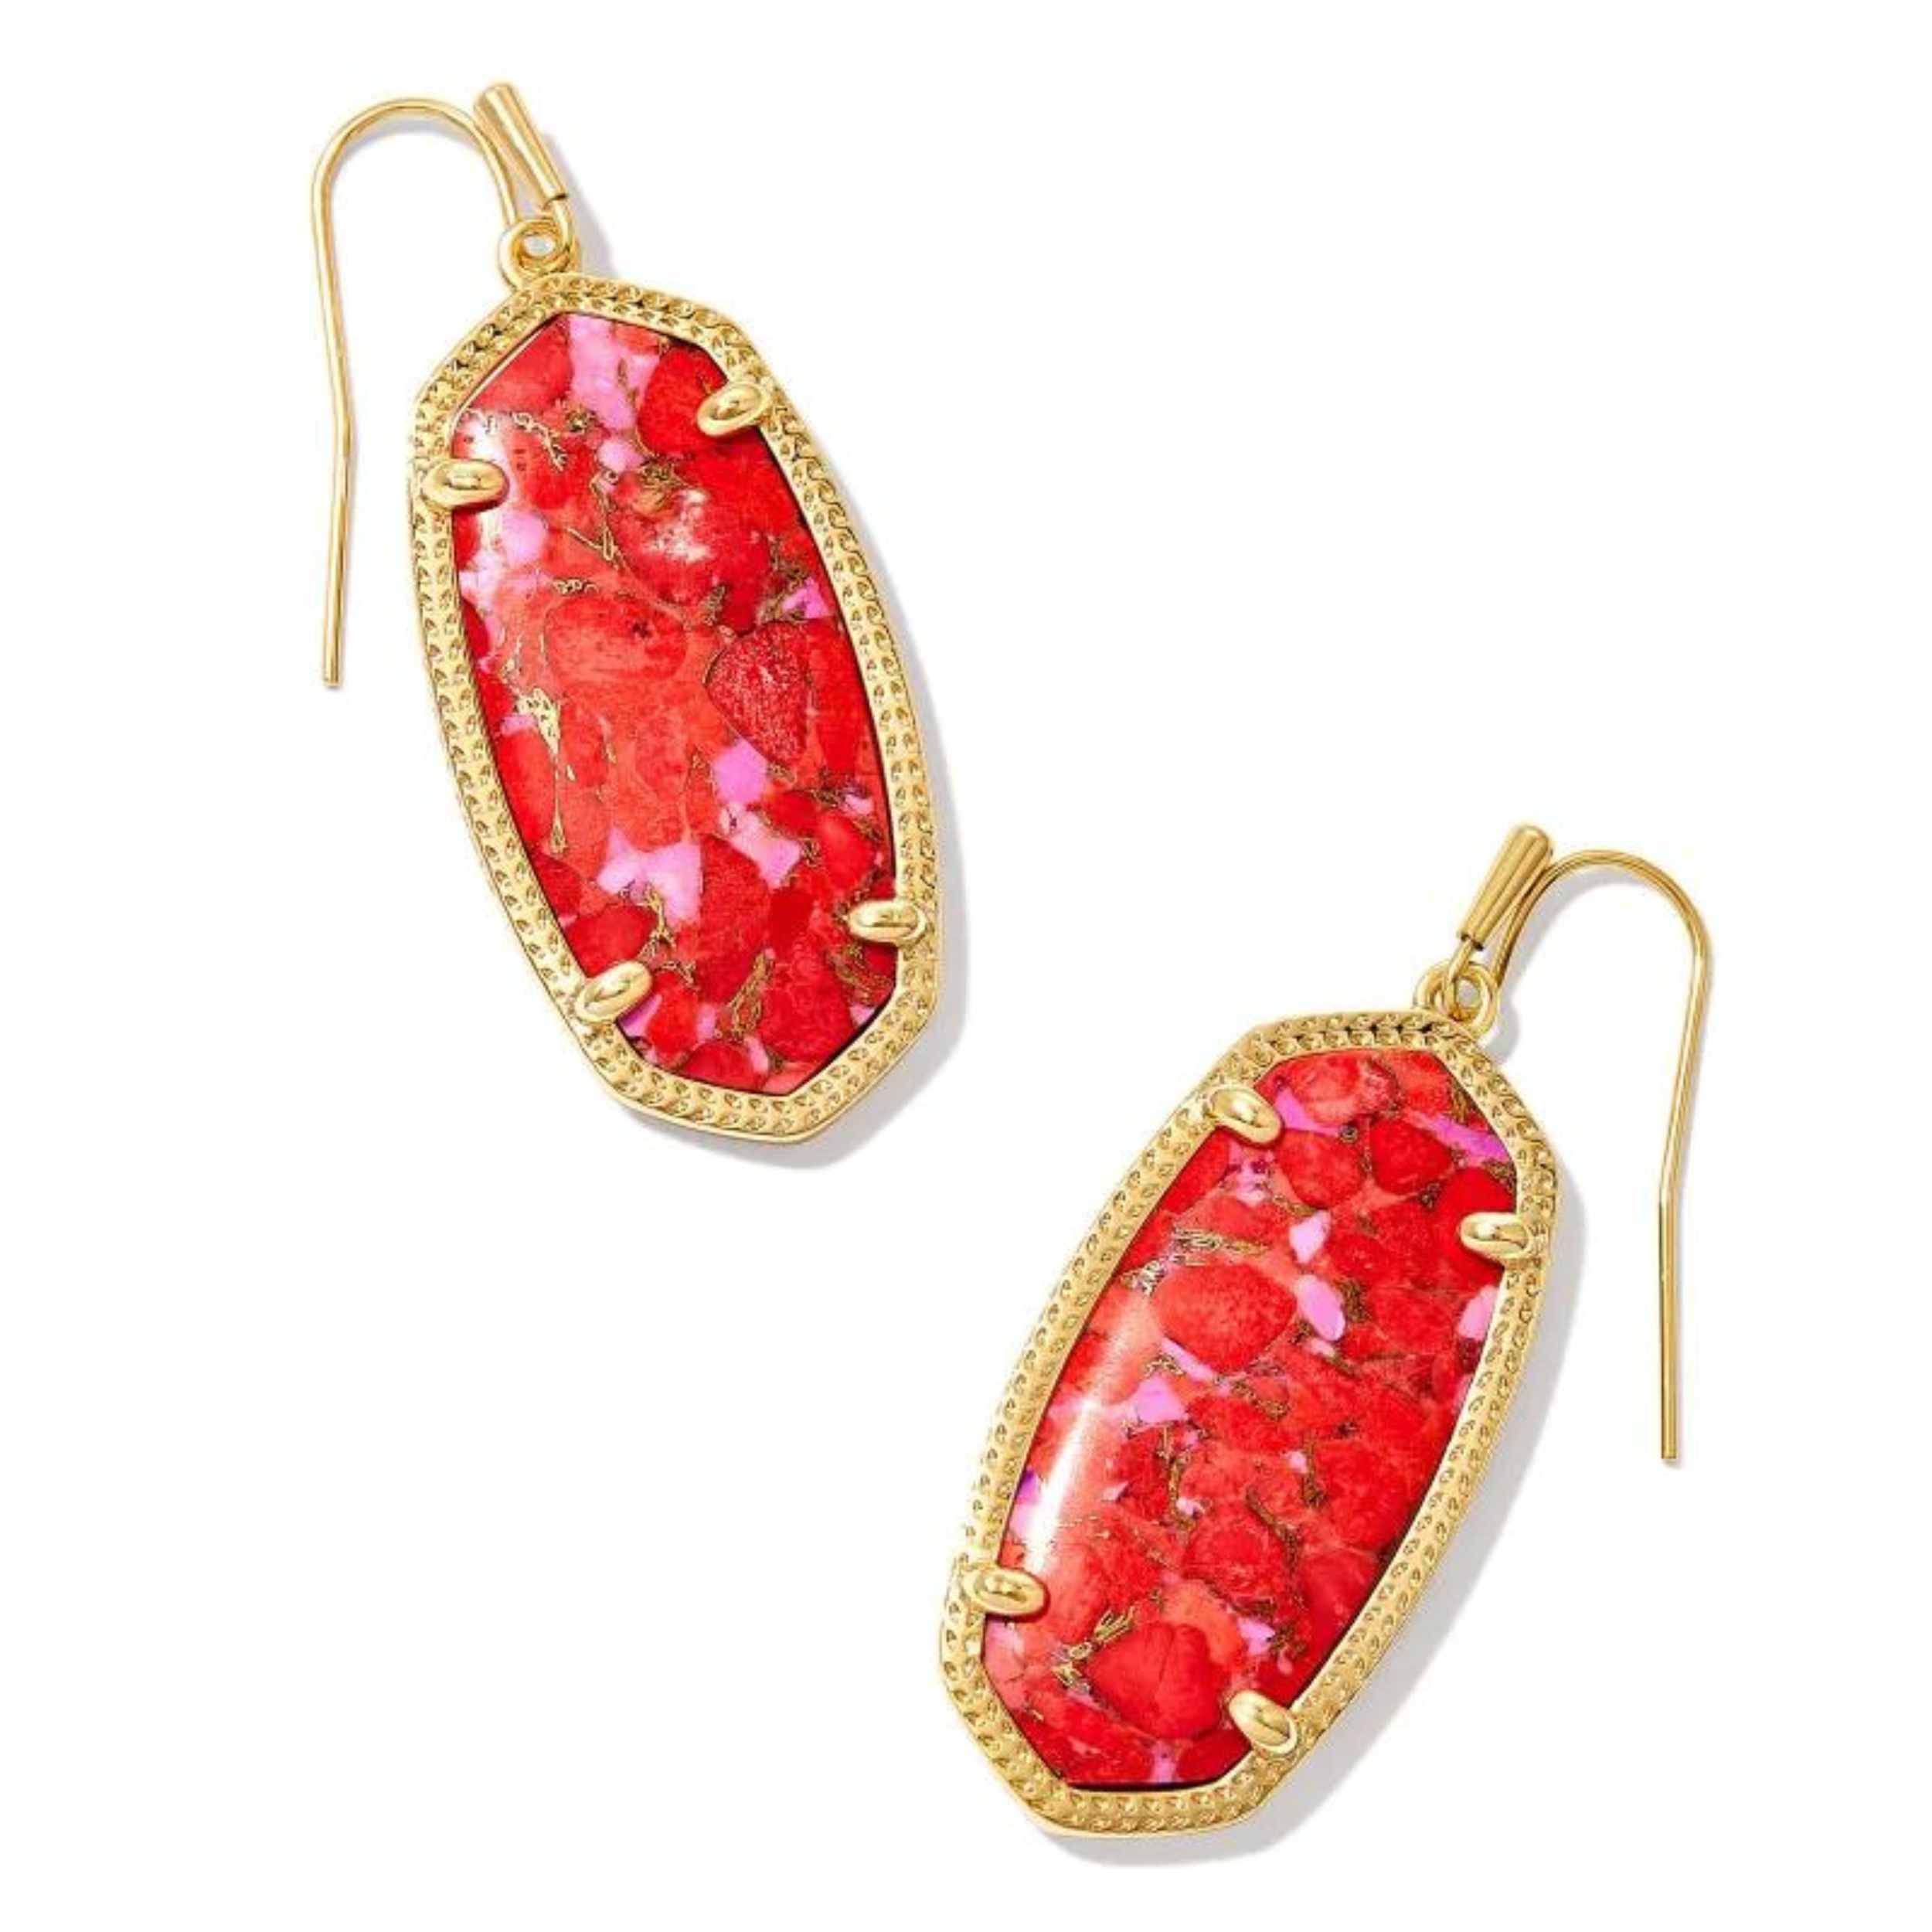 Kendra Scott | Elle Gold Drop Earrings in Bronze Veined Red Fuchsia Magnesite. Pictured on a white background.